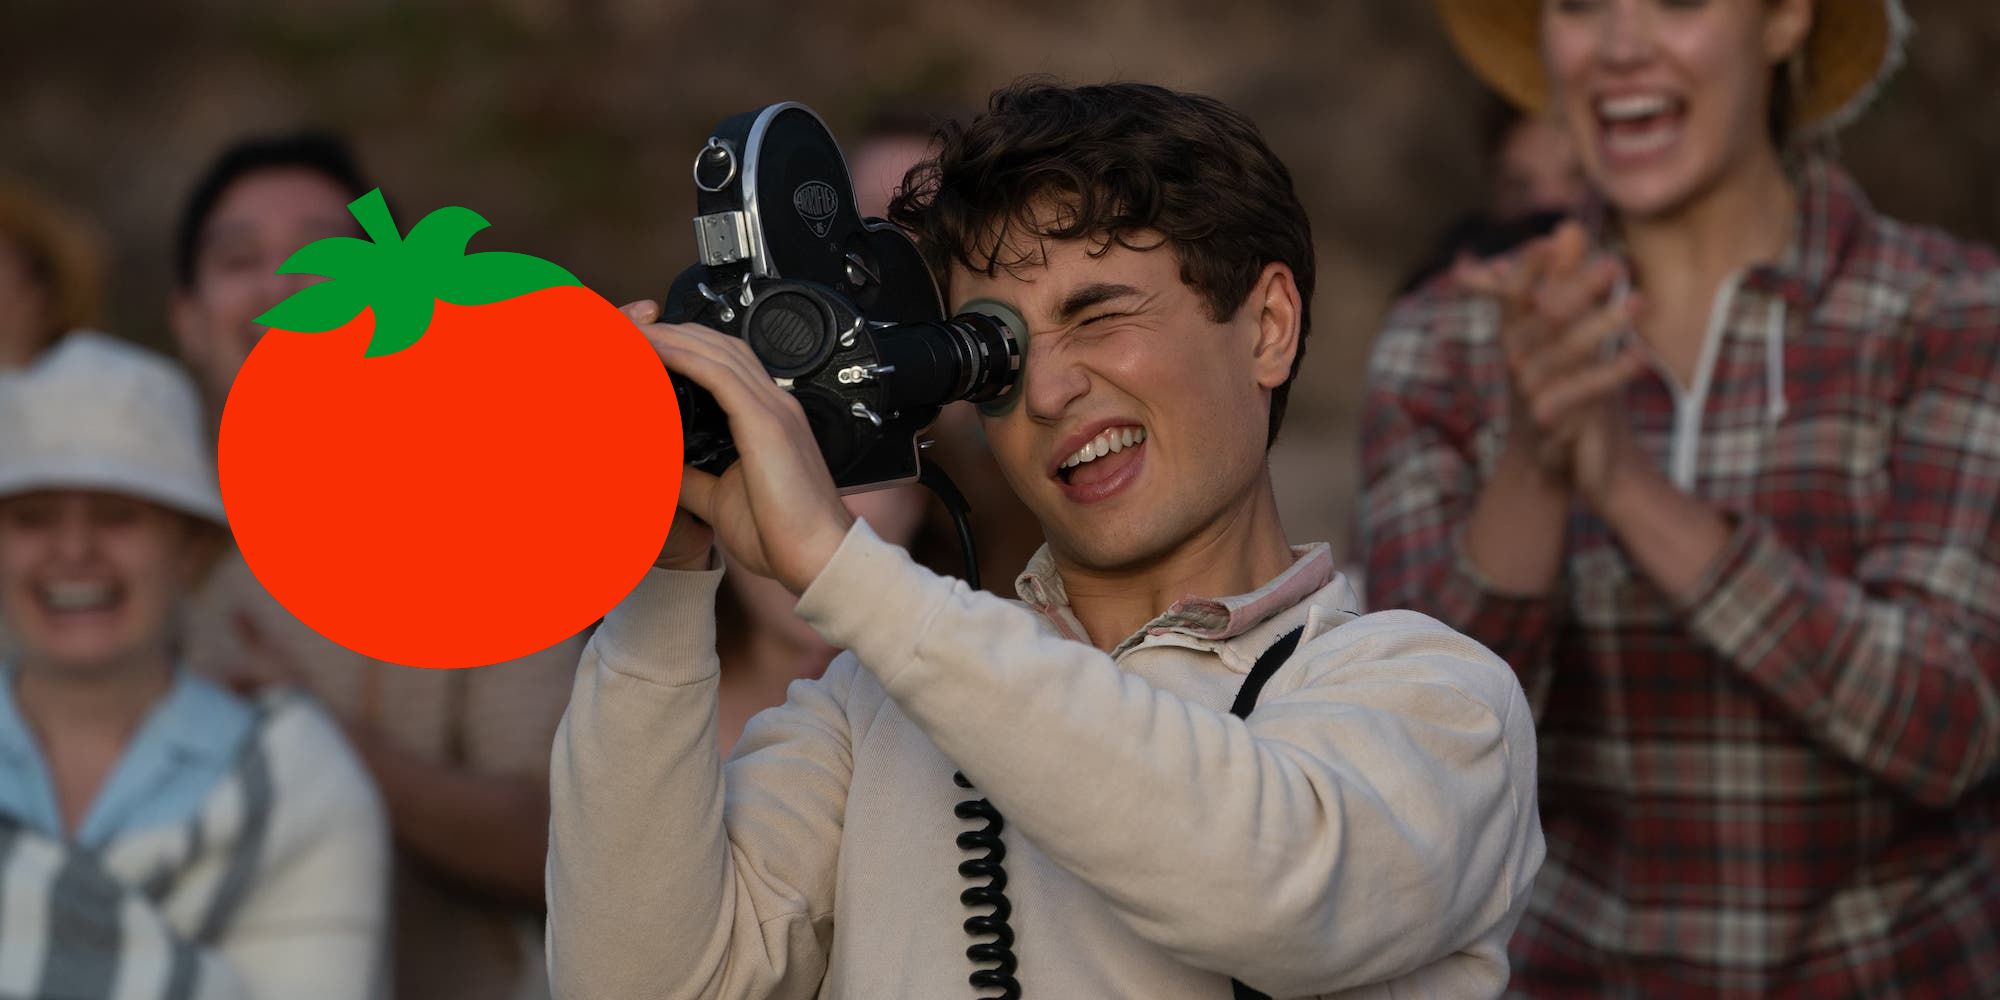 The Fabelmans and the Rotten Tomatoes logo